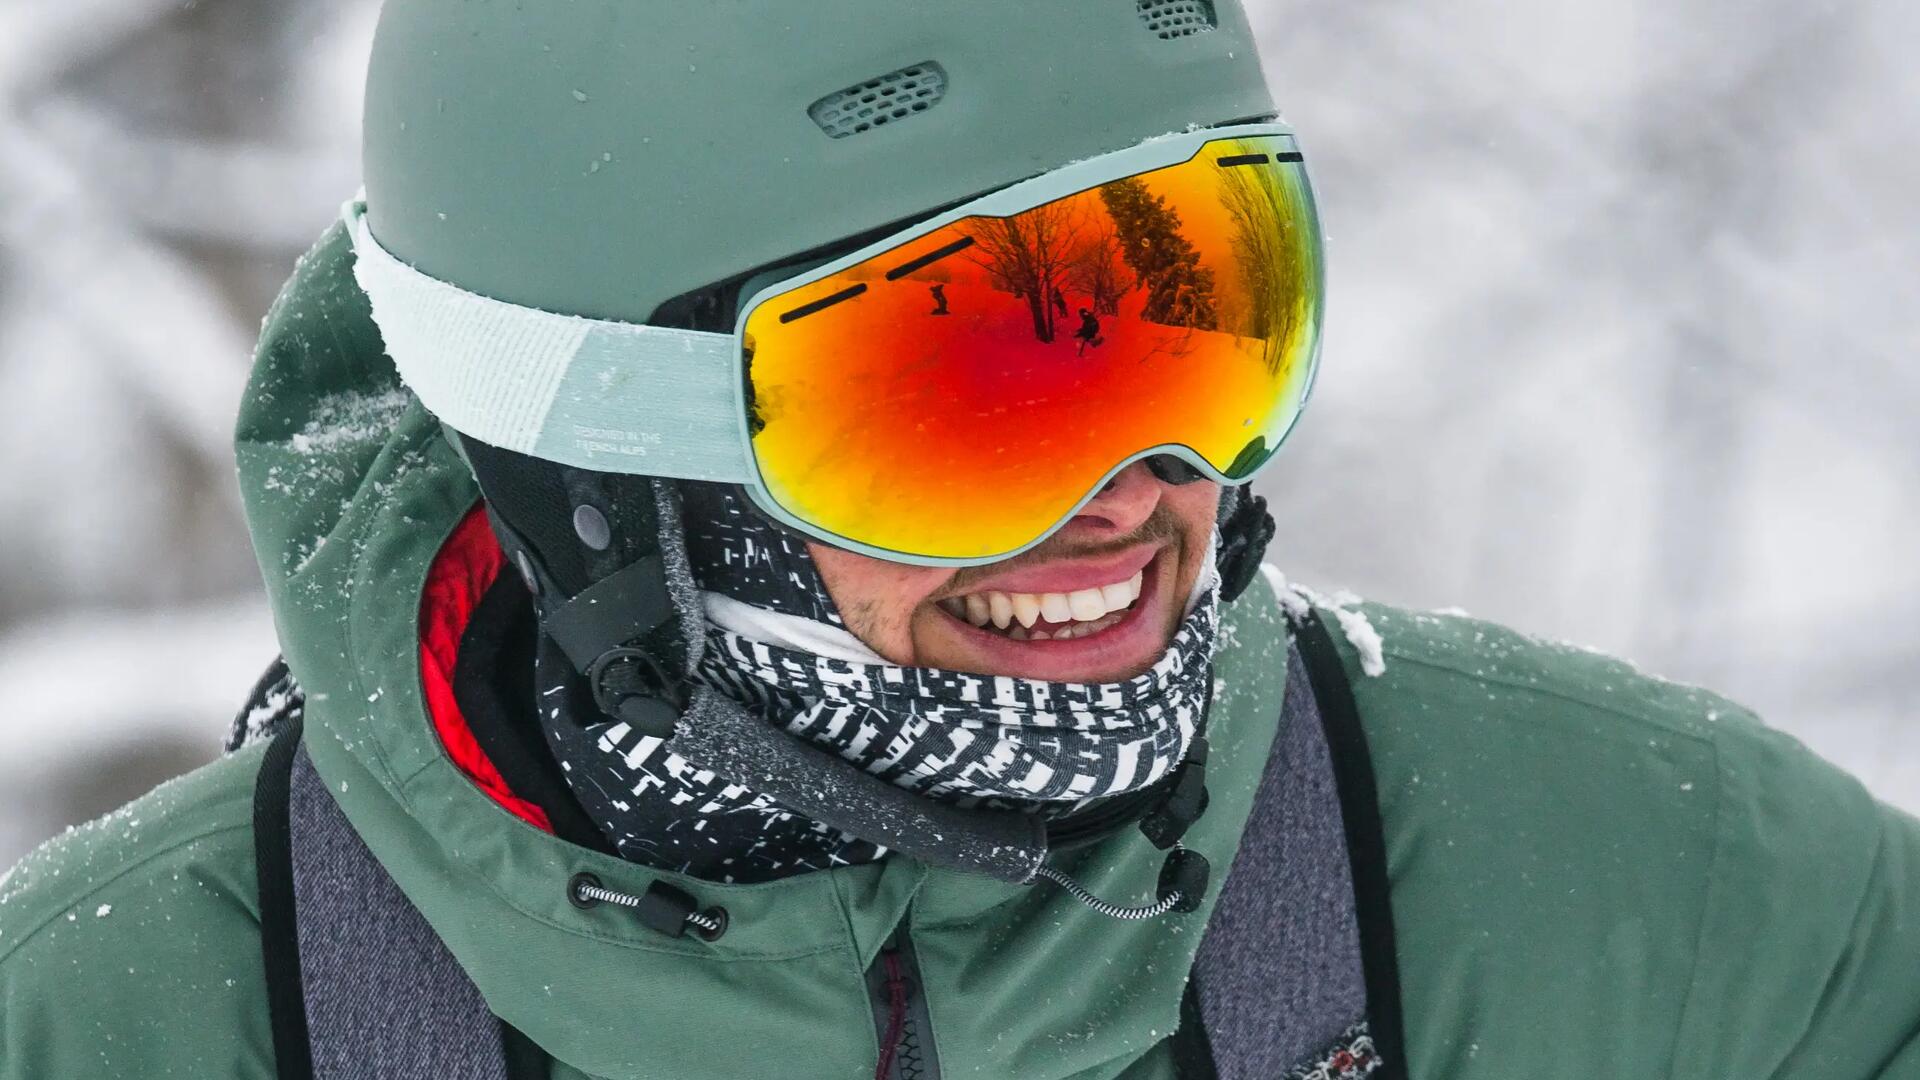 How to choose your new ski or snowboard goggles